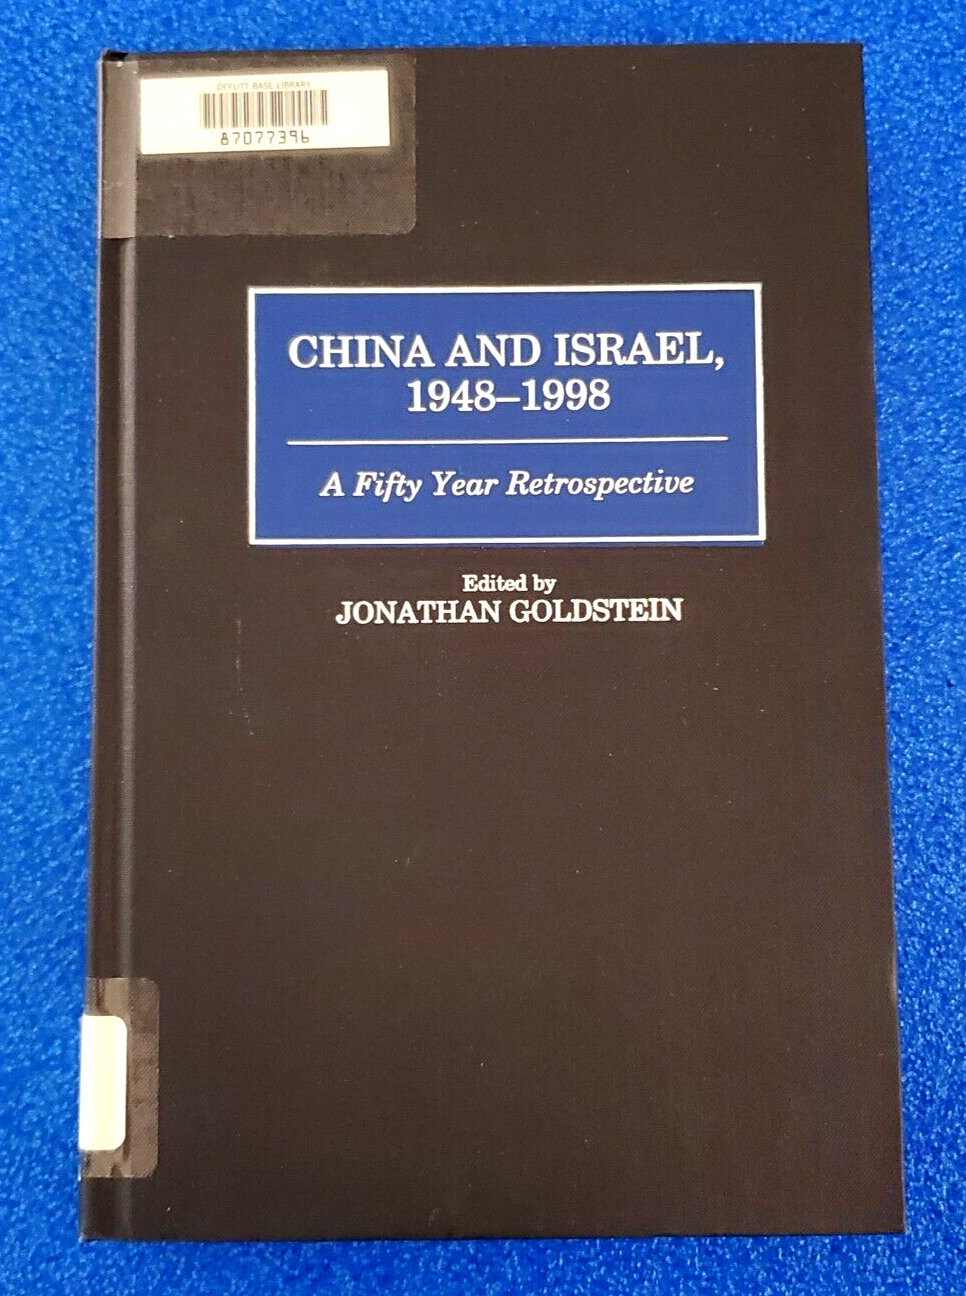 CHINA AND ISRAEL 1948-1998 HARDCOVER A FIFTY YEAR RETROSPECTIVE FORIEGN POLITICS